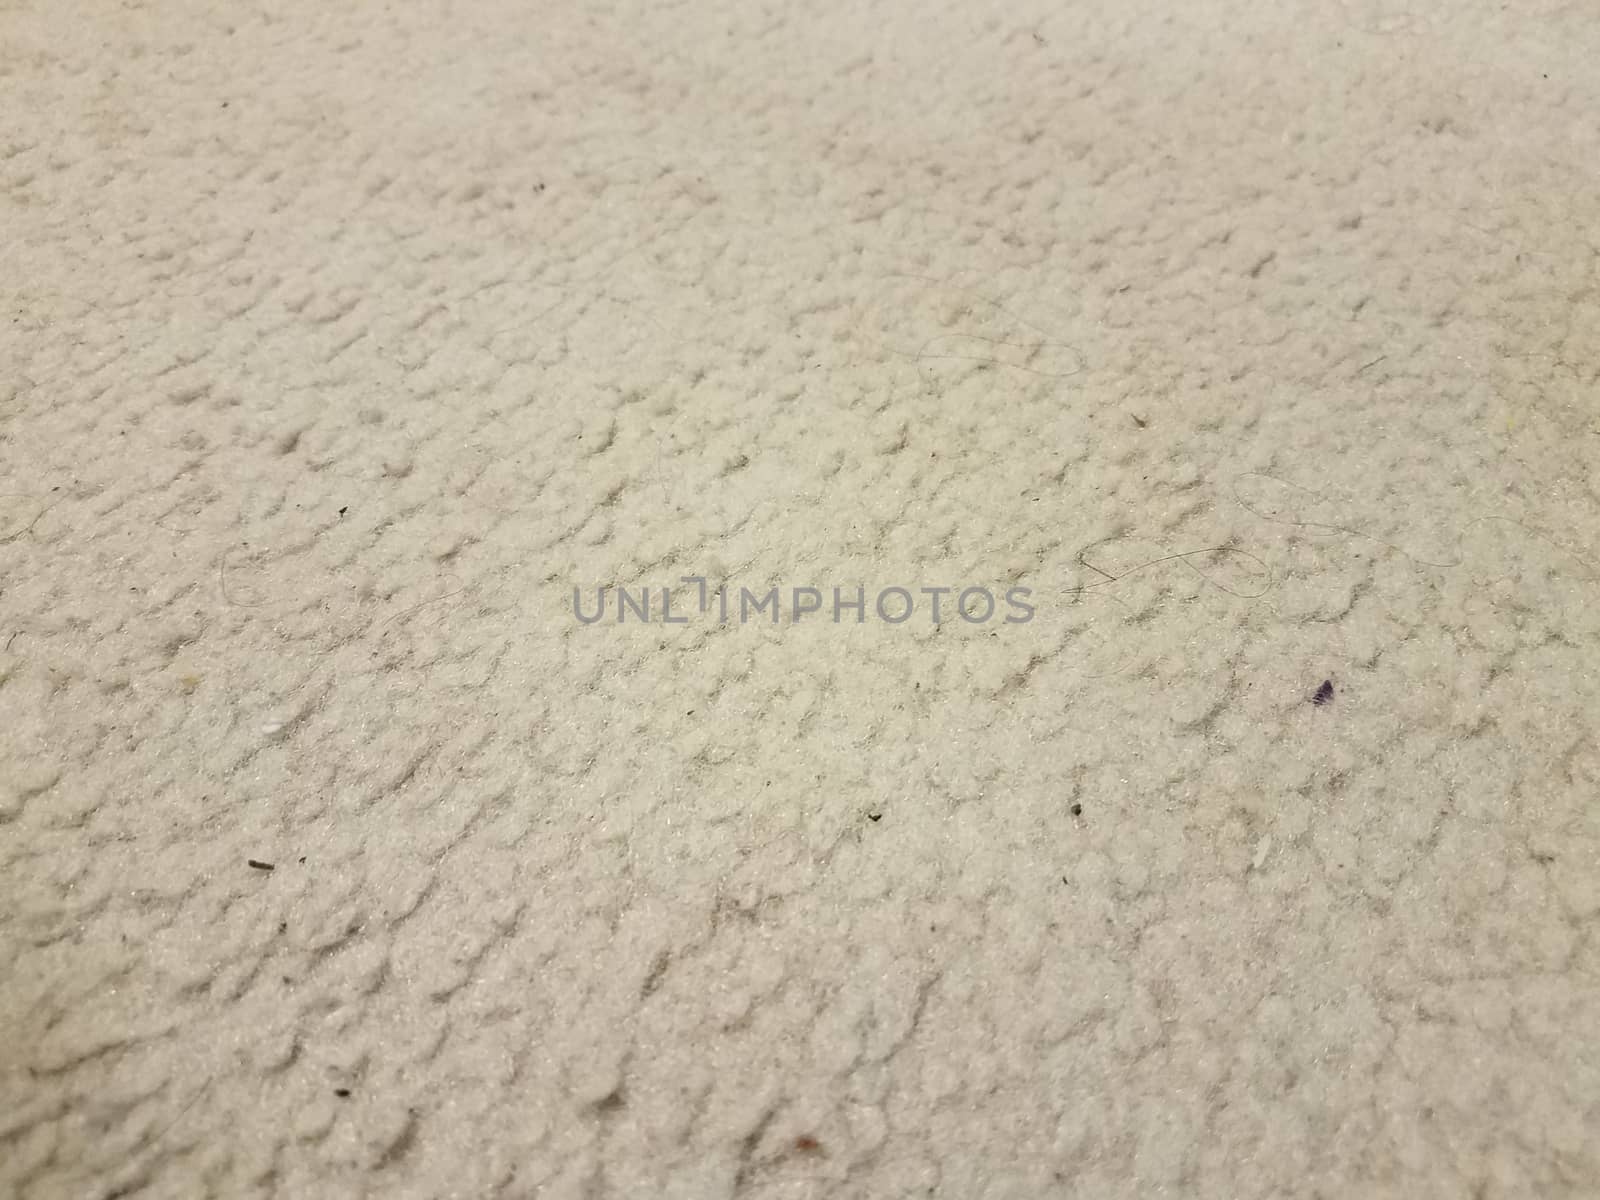 dirty white or grey carpet or rug with hairs by stockphotofan1